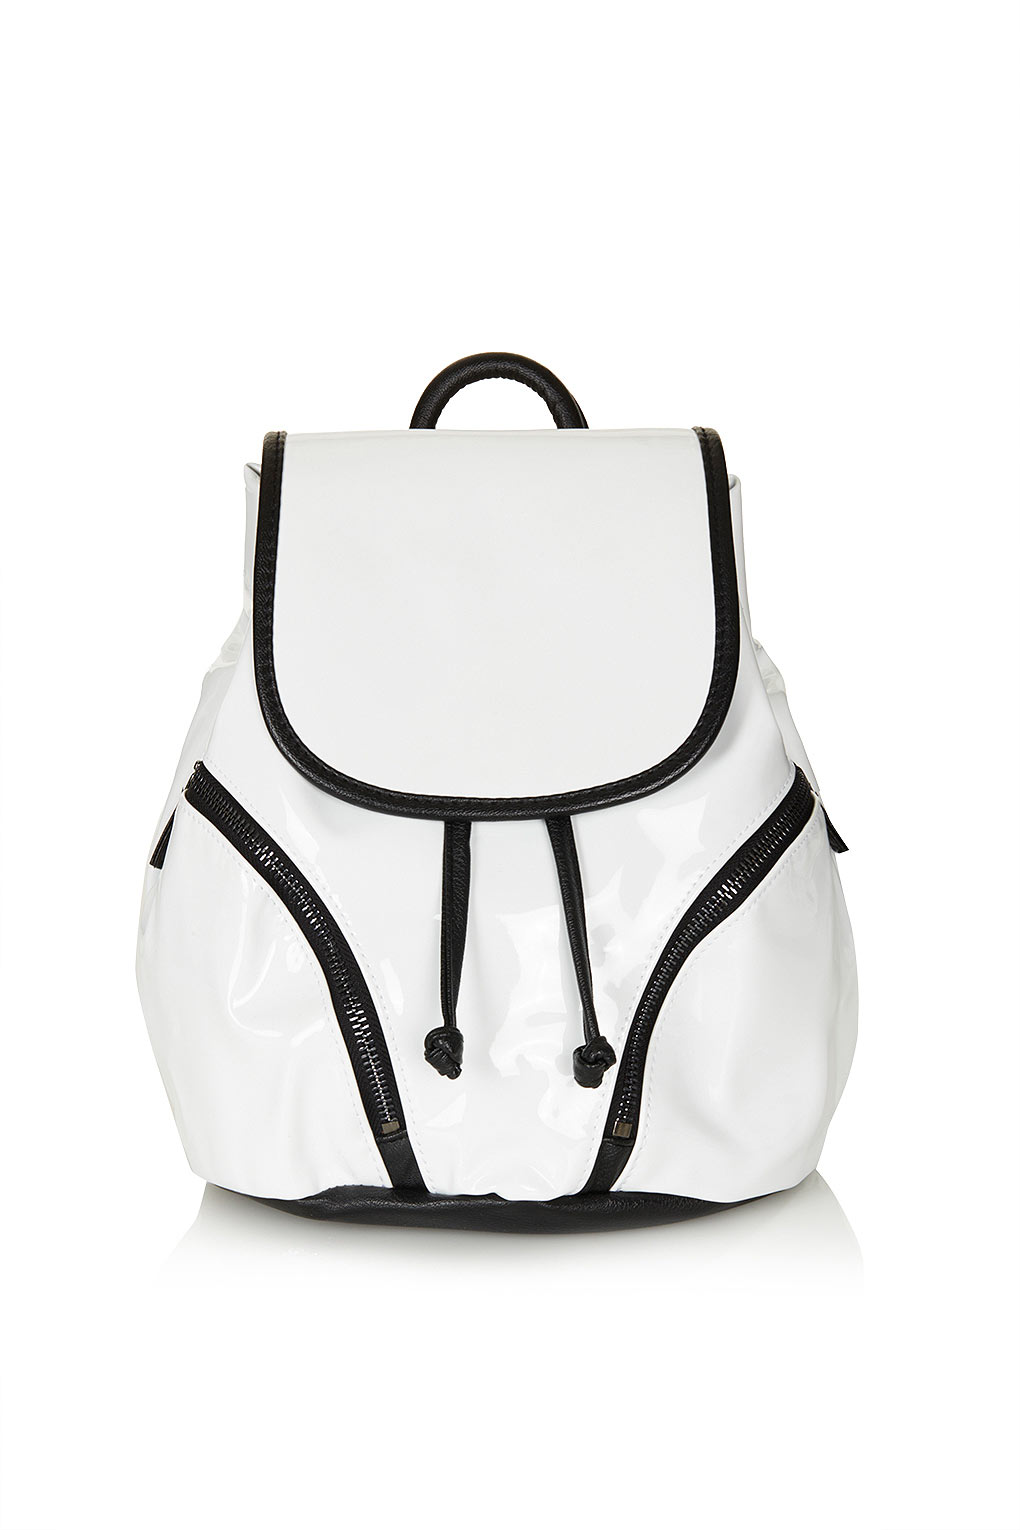 Lyst - Topshop Patent Mini Backpack in White